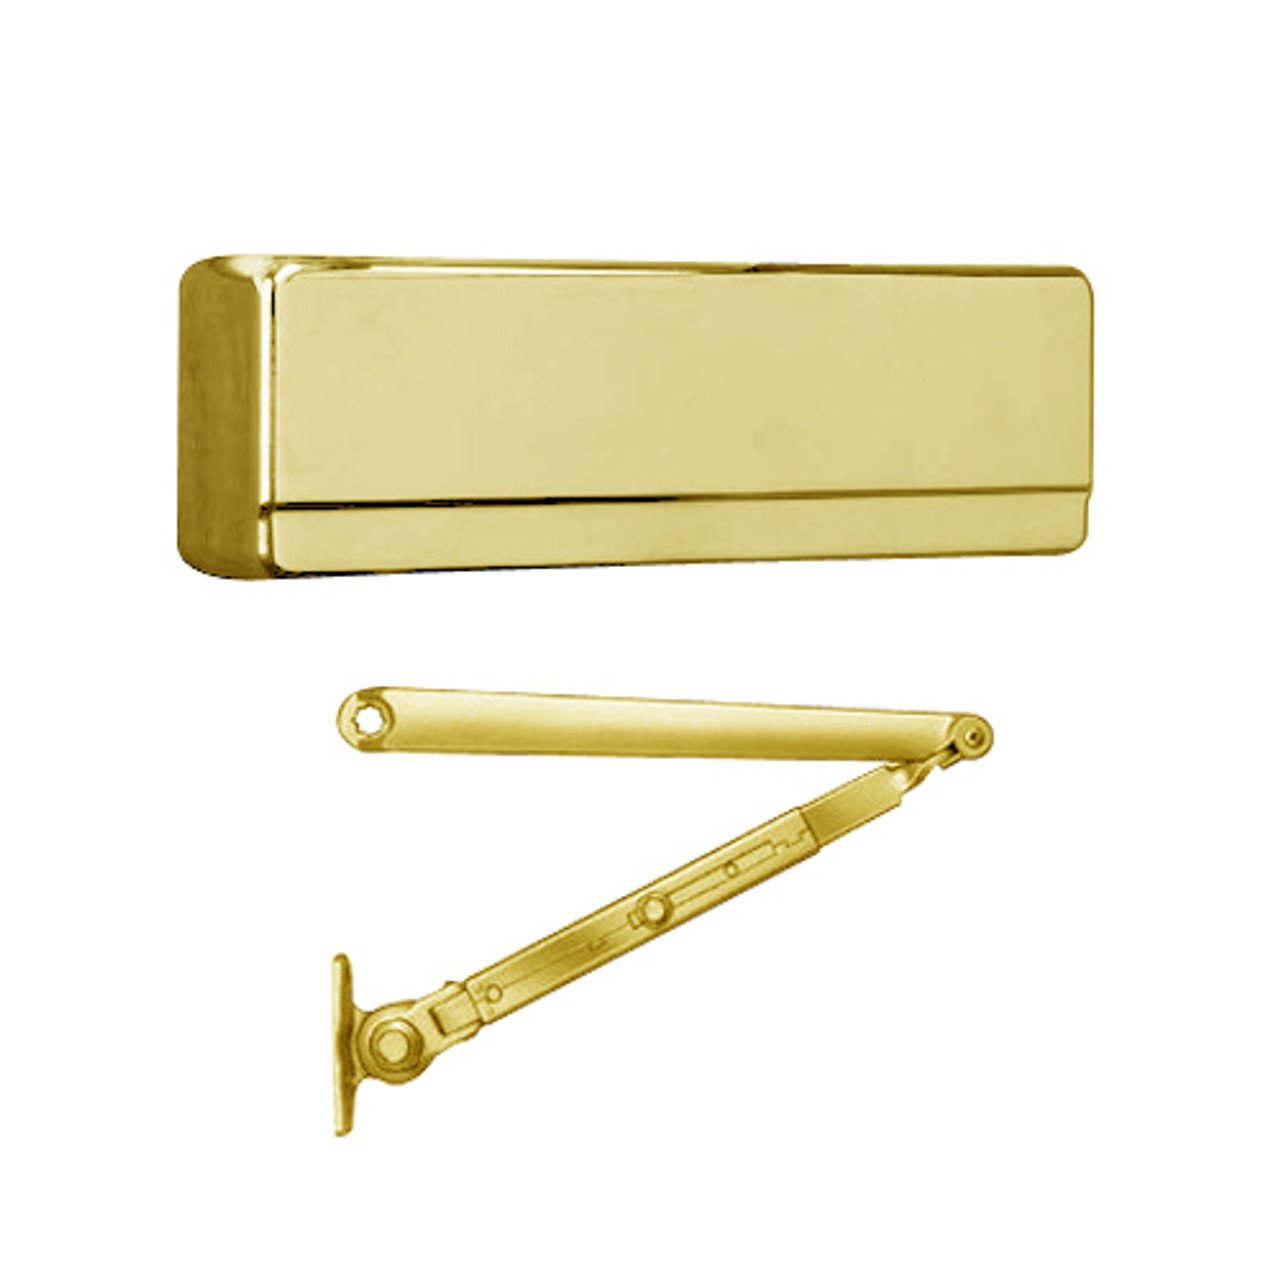 281-H-EAB Sargent 281 Series Powerglide Cast Iron Door Closer with Regular Duty Hold Open Arm in Brass Powder Coat